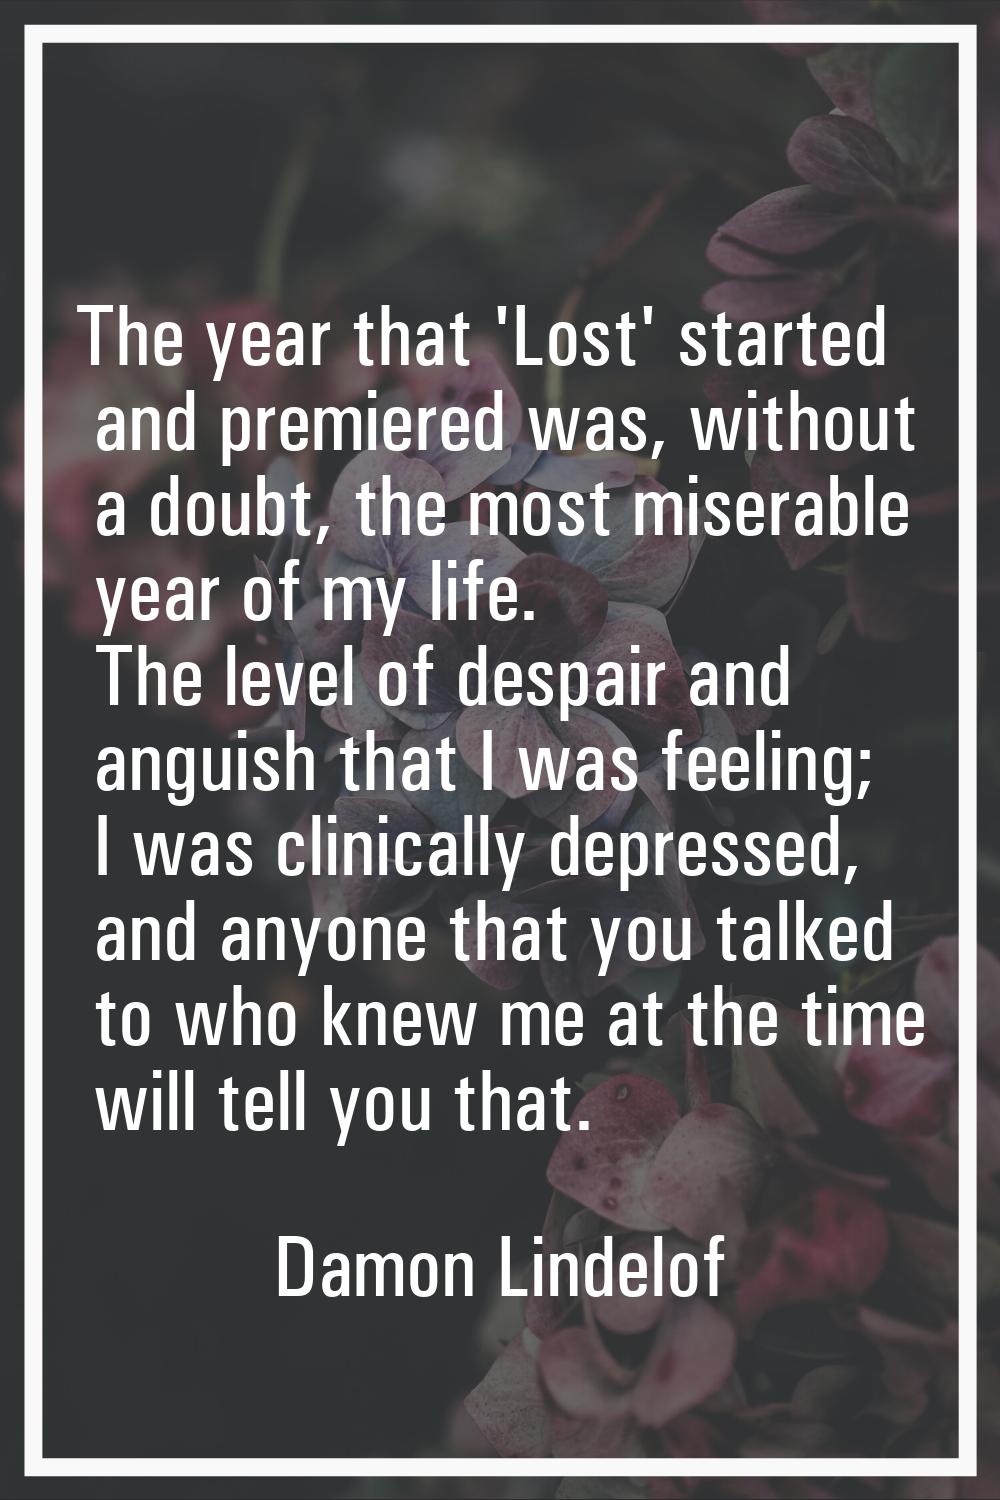 The year that 'Lost' started and premiered was, without a doubt, the most miserable year of my life